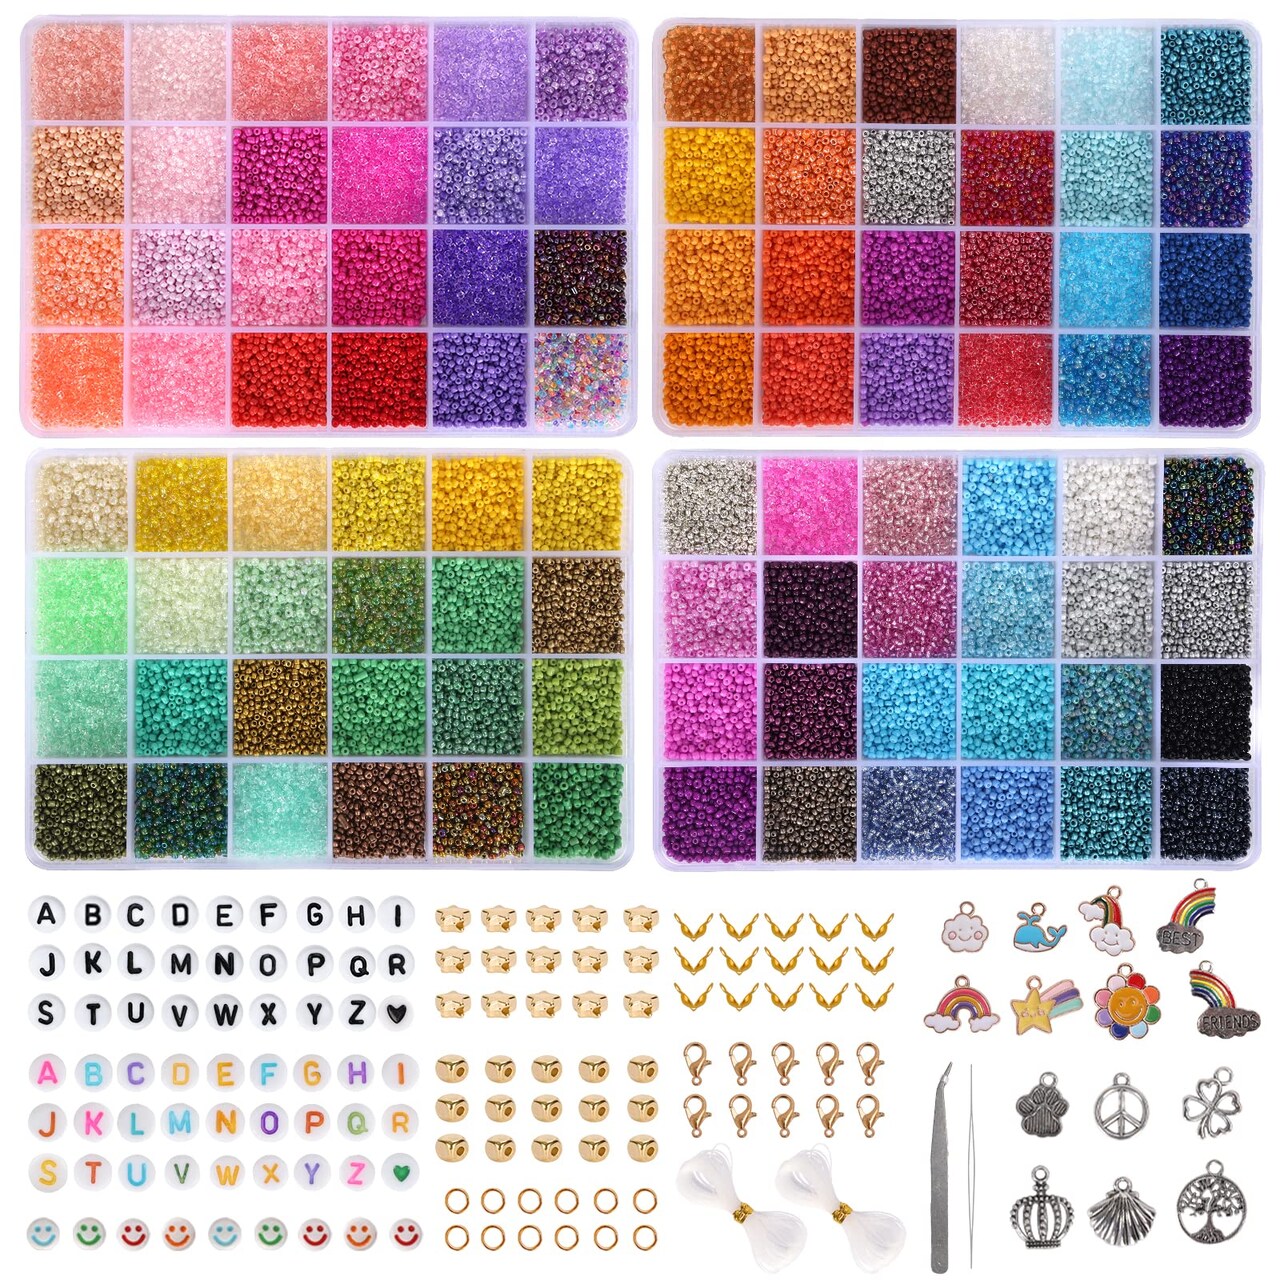 QUEFE 48000pcs 2mm Glass Seed Beads for Jewelry Making Kit, 96